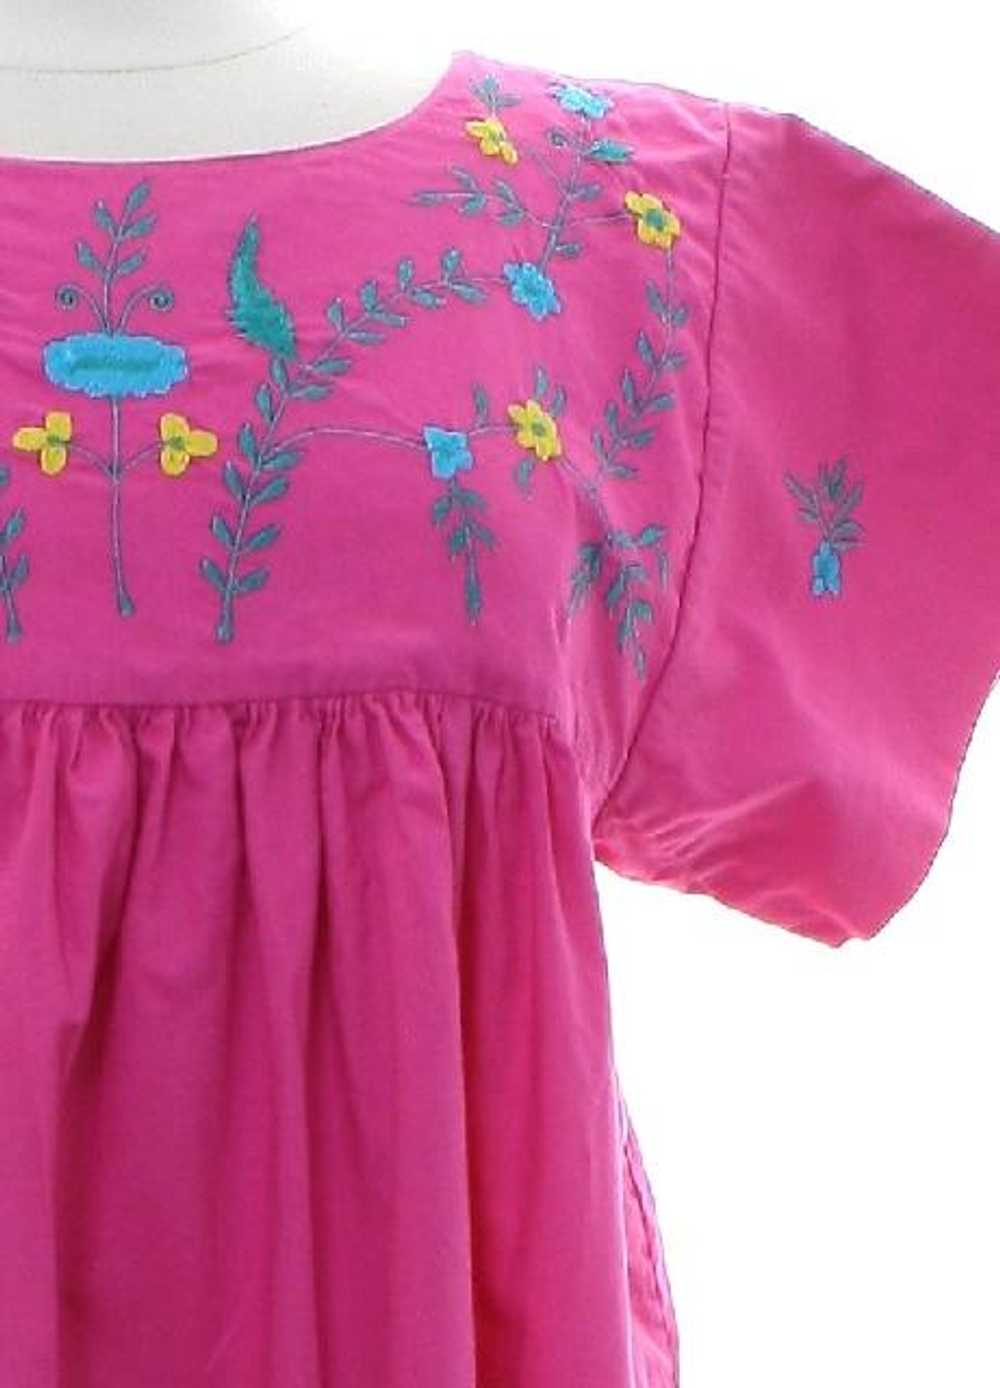 1970's Embroidered Hippie Dress - image 2